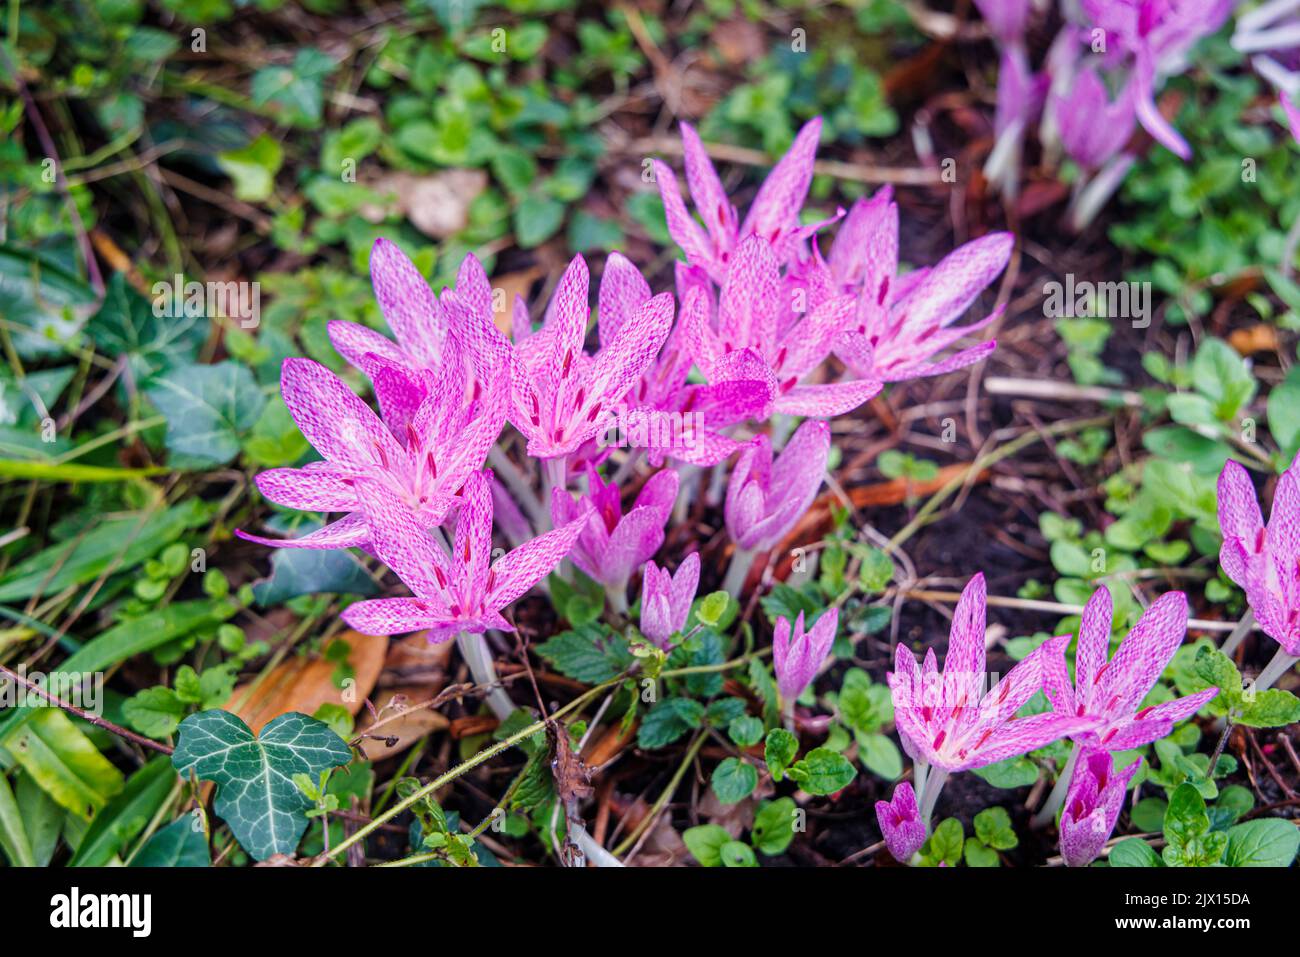 Delicate purple mottled Colchicum agrippinum (autumn crocus) in flower in late summer to early autumn in a garden in Surrey, south-east England Stock Photo